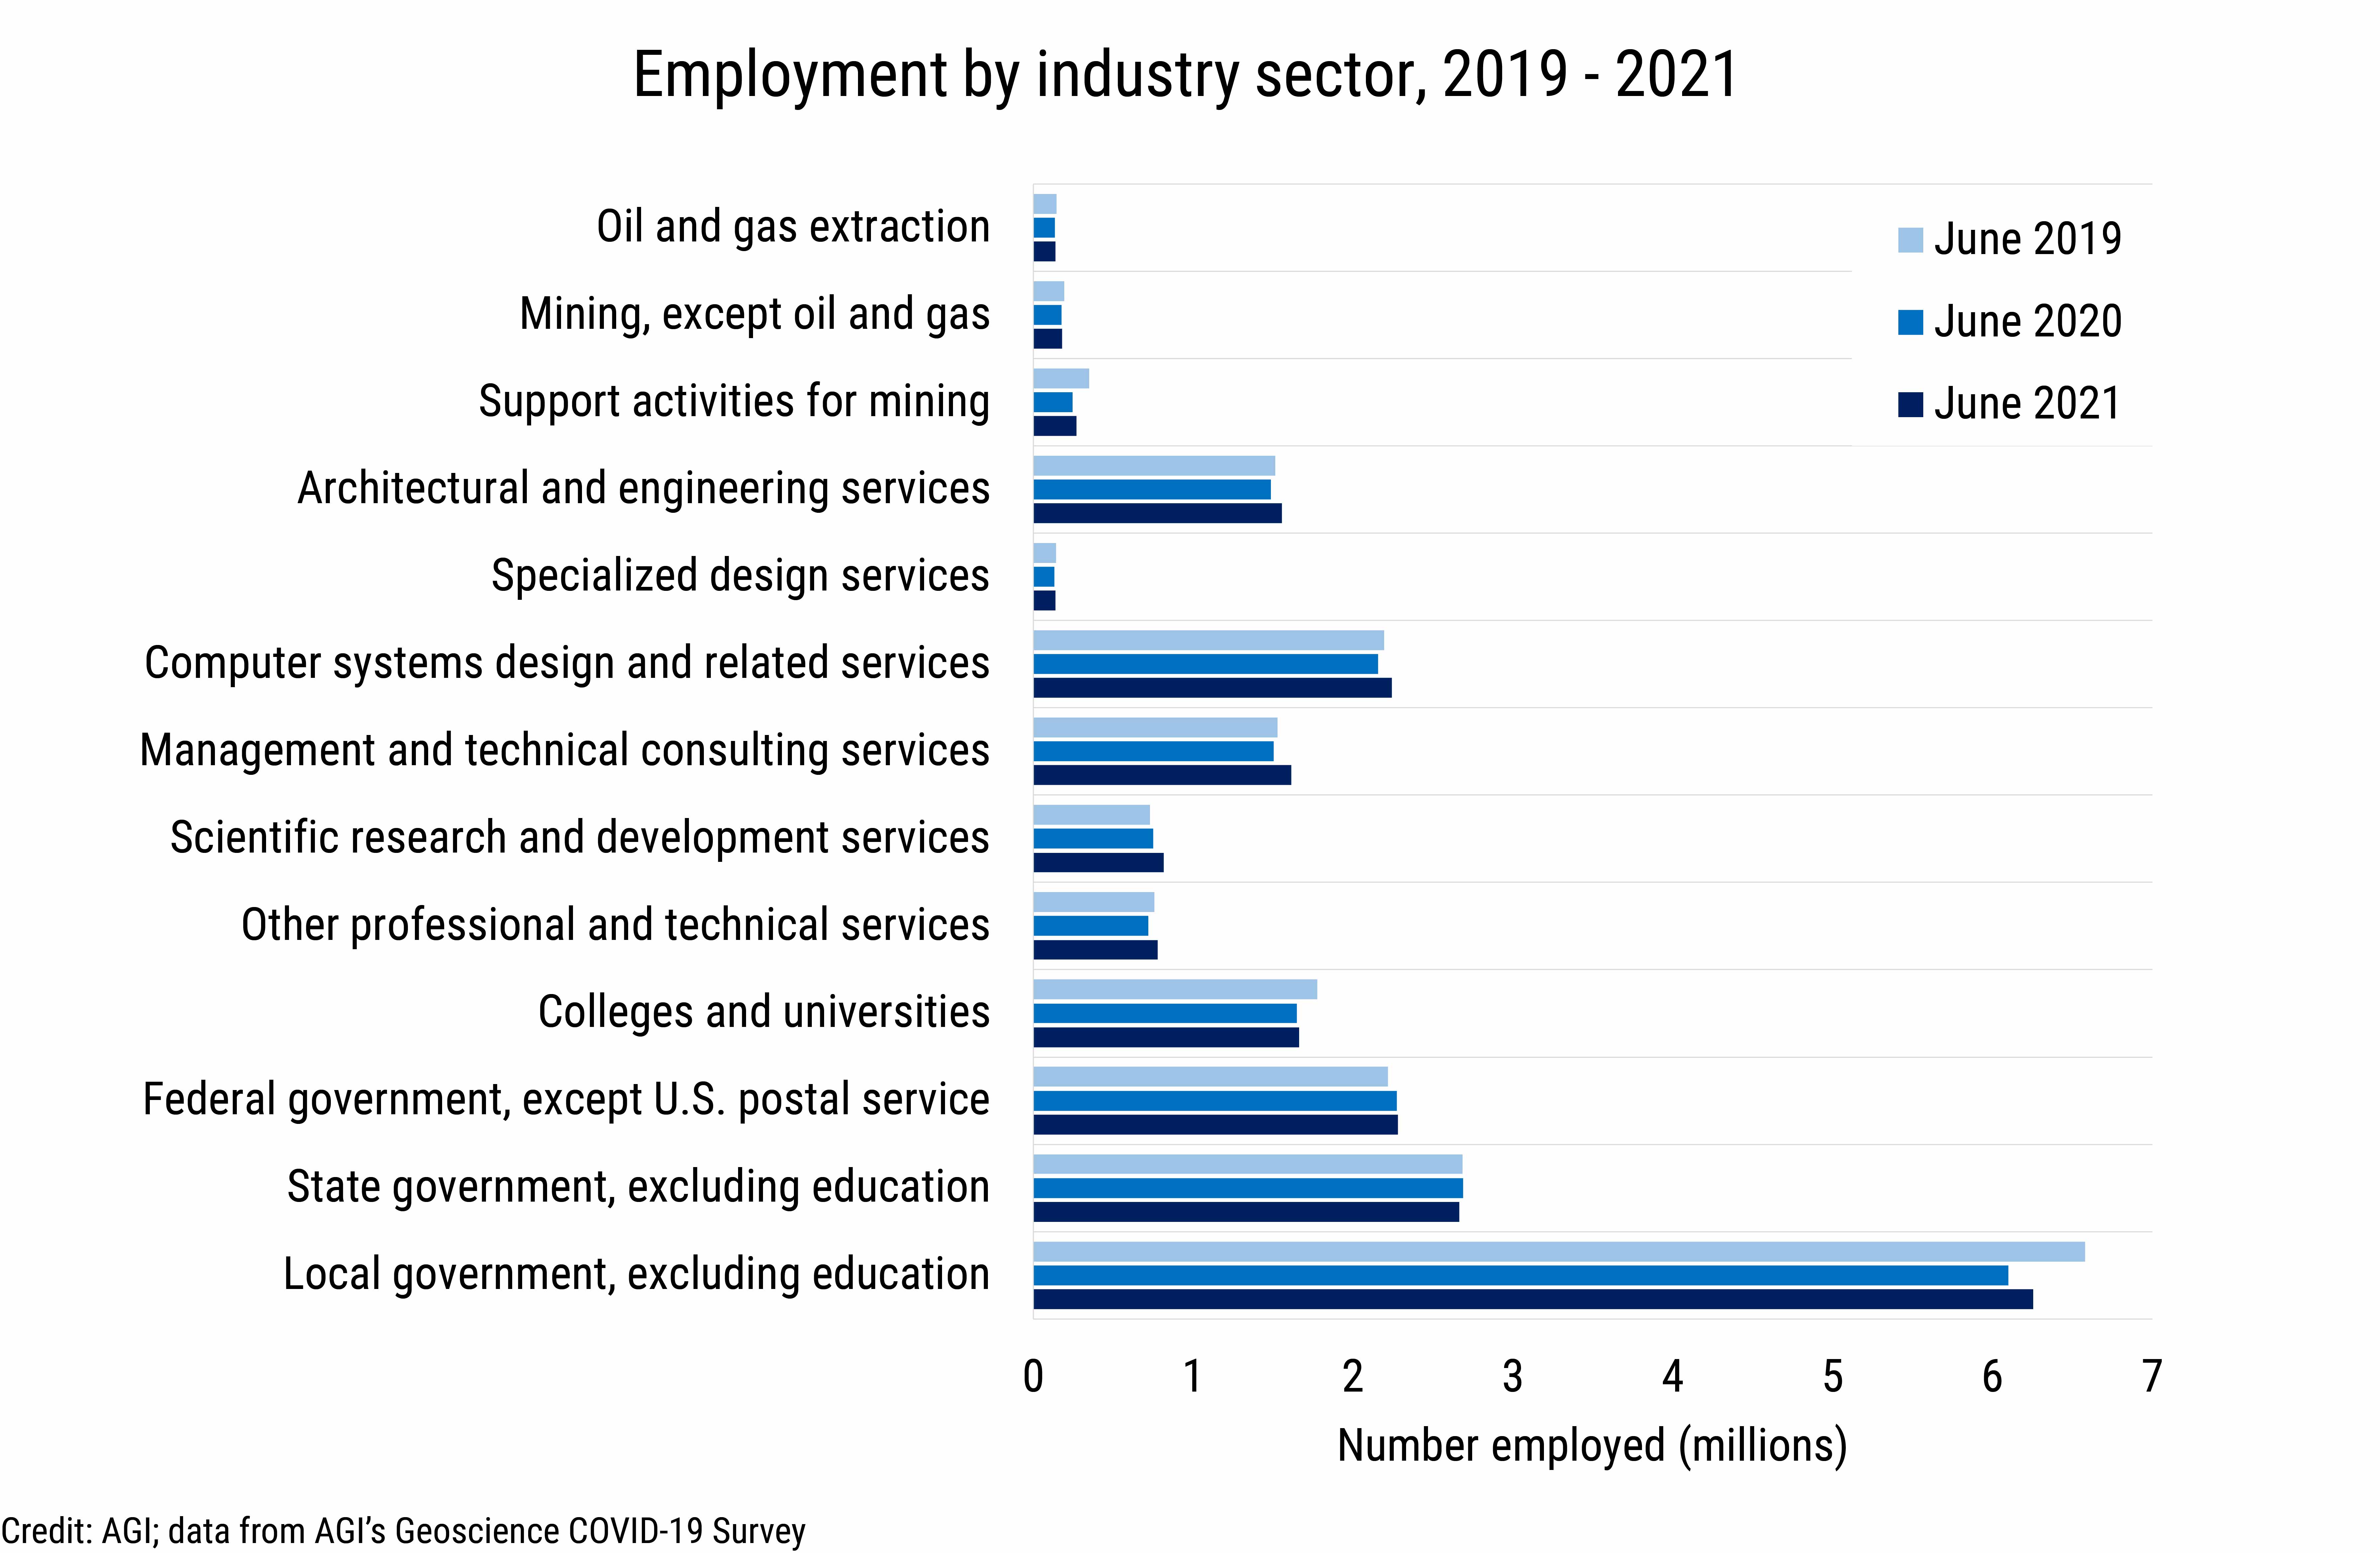 DB_2021-023 chart 03: Employment by industry sector, 2019-2021 (Credit: AGI, data derived from the U.S. Bureau of Labor Statistics, Current Employment Statistics)